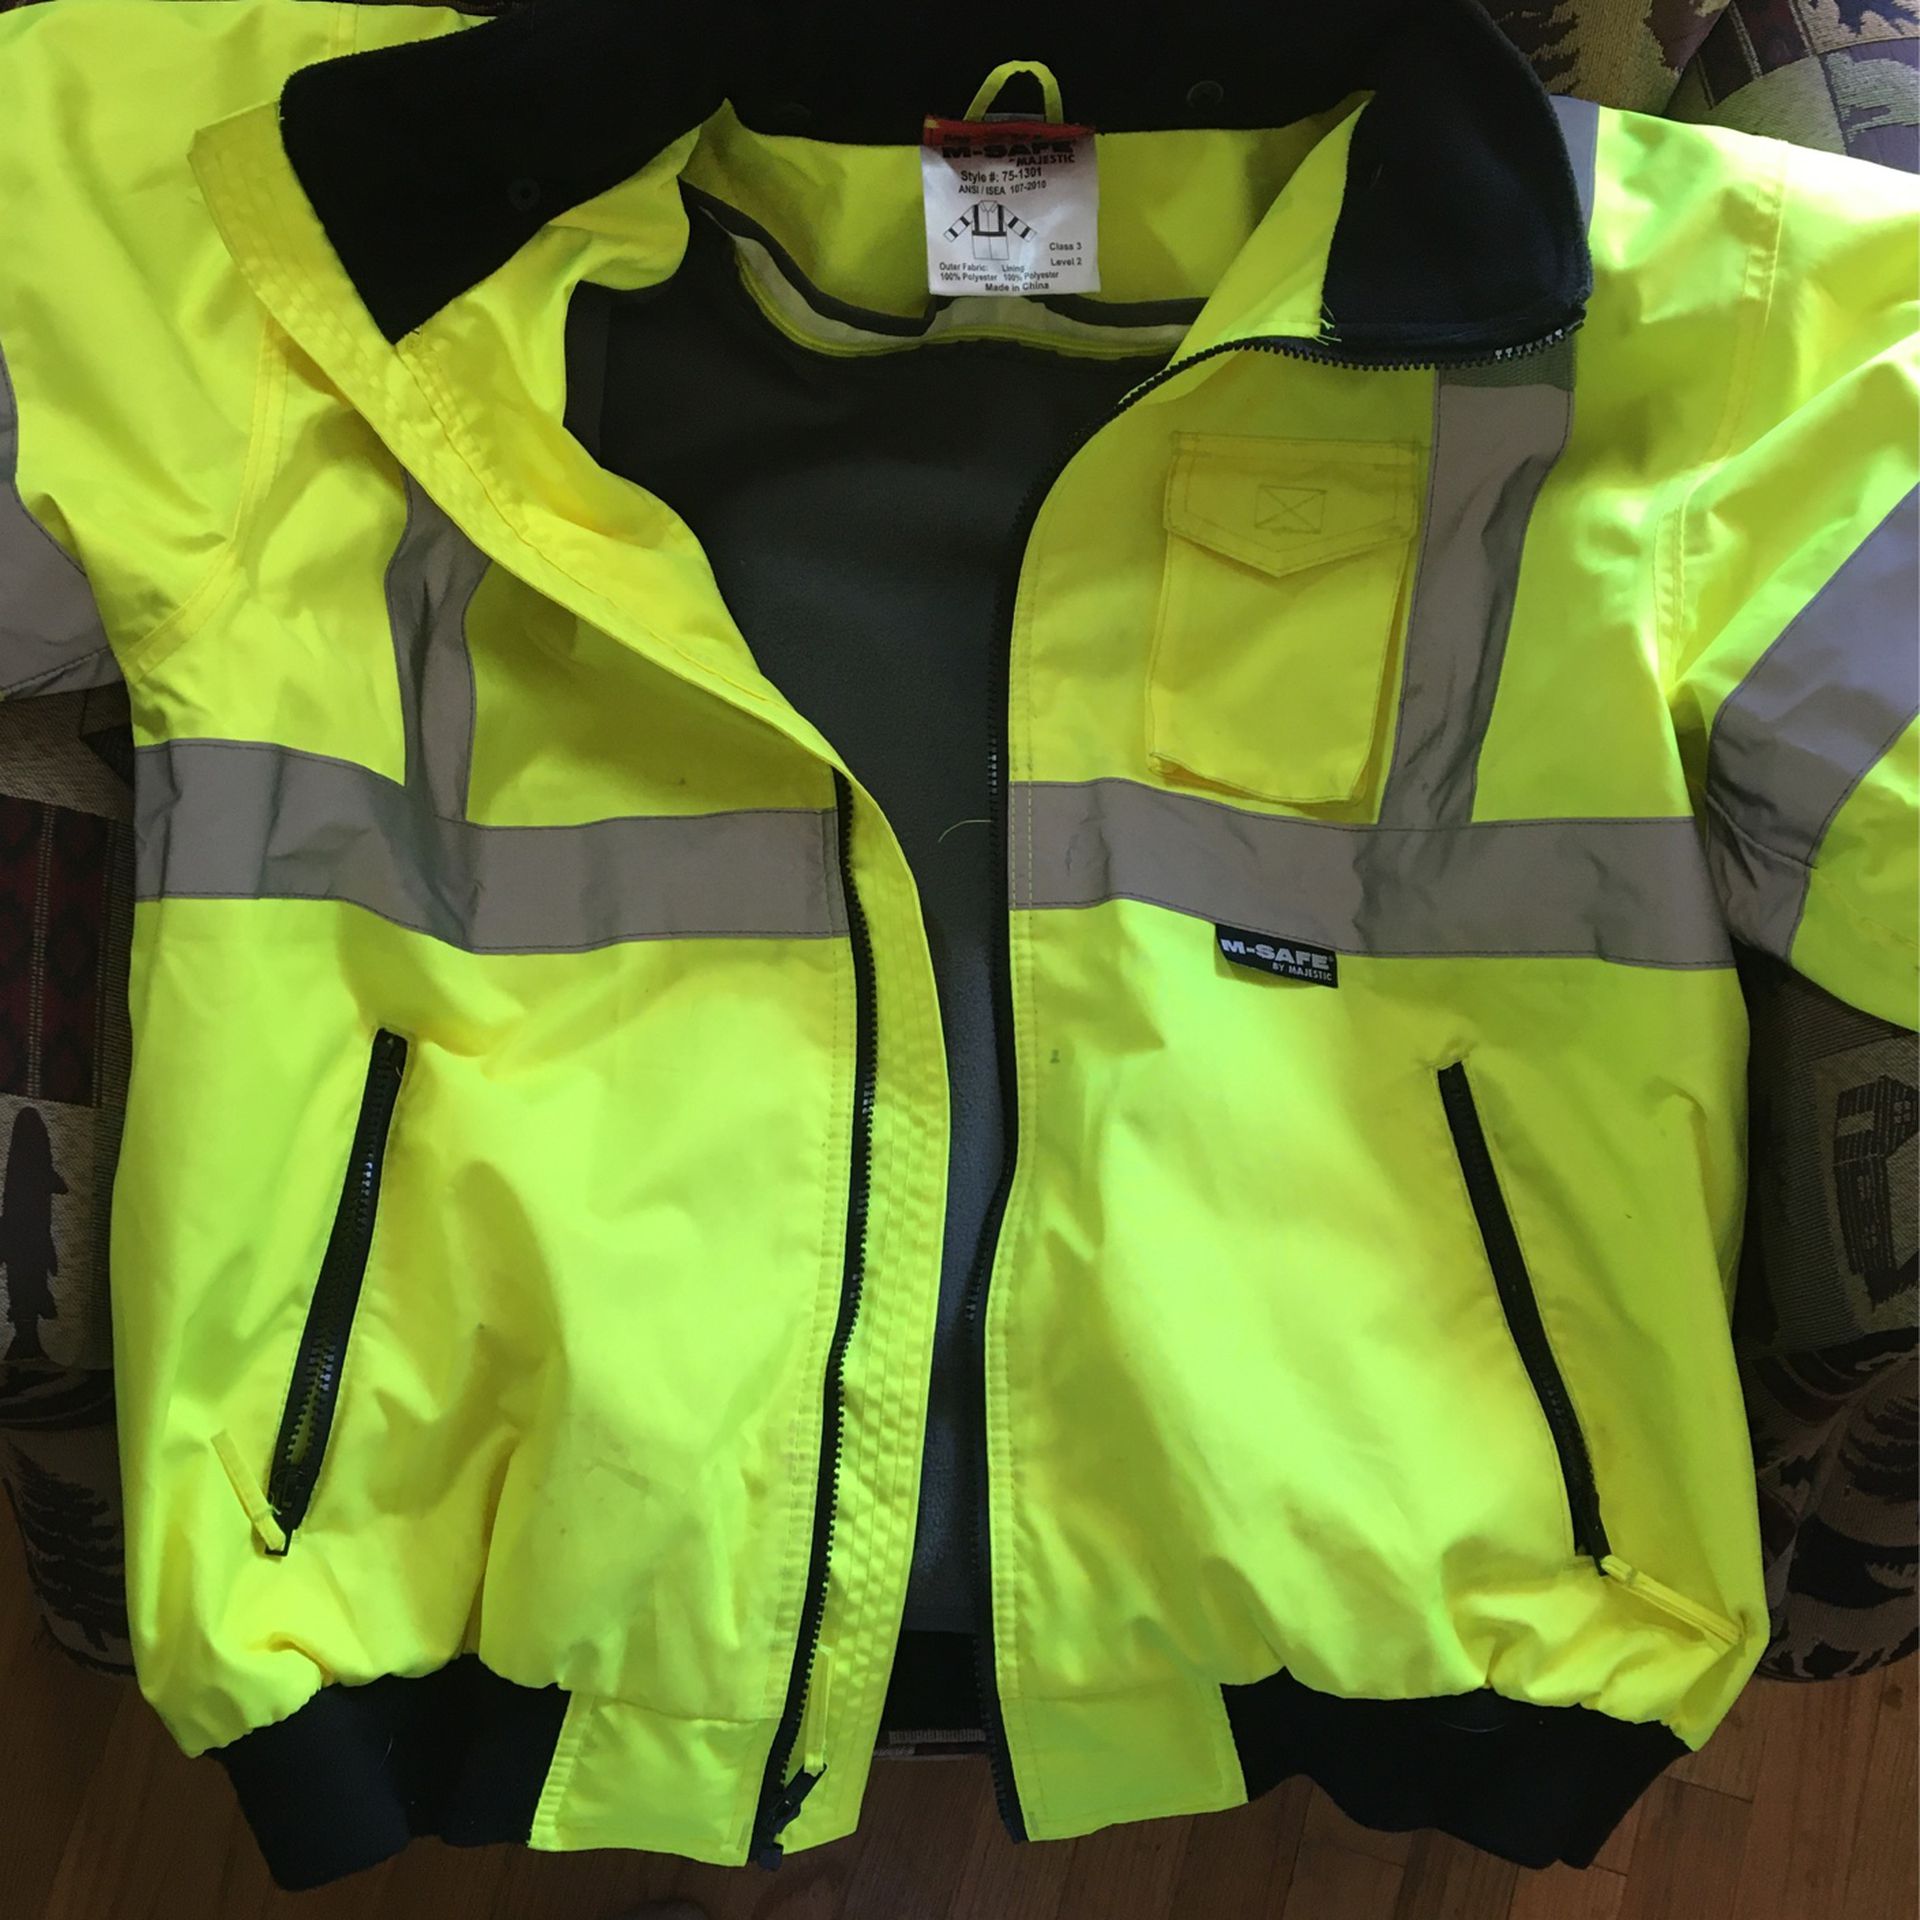 M-SAFE Jacket By majestic / Highly - Visible Jacket / Size Large for ...